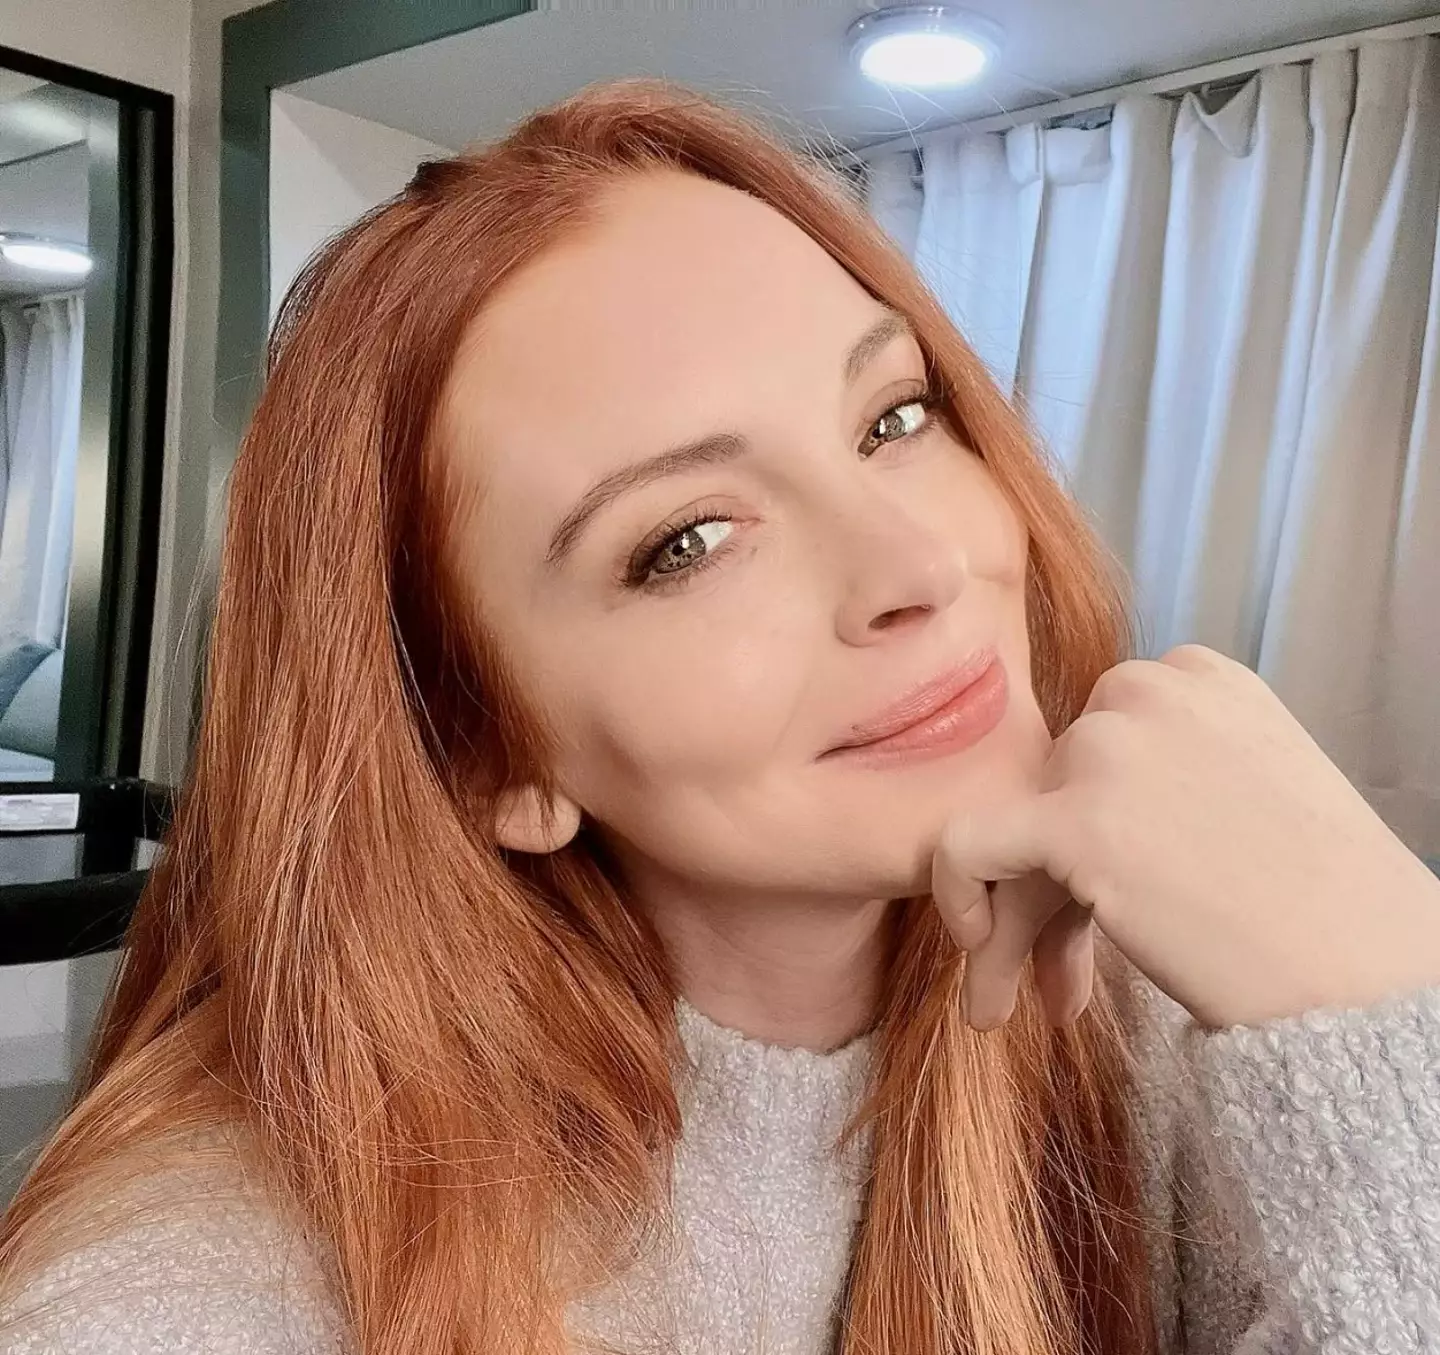 Lindsay Lohan has signed up to a total of three Netflix films, with the second out now.